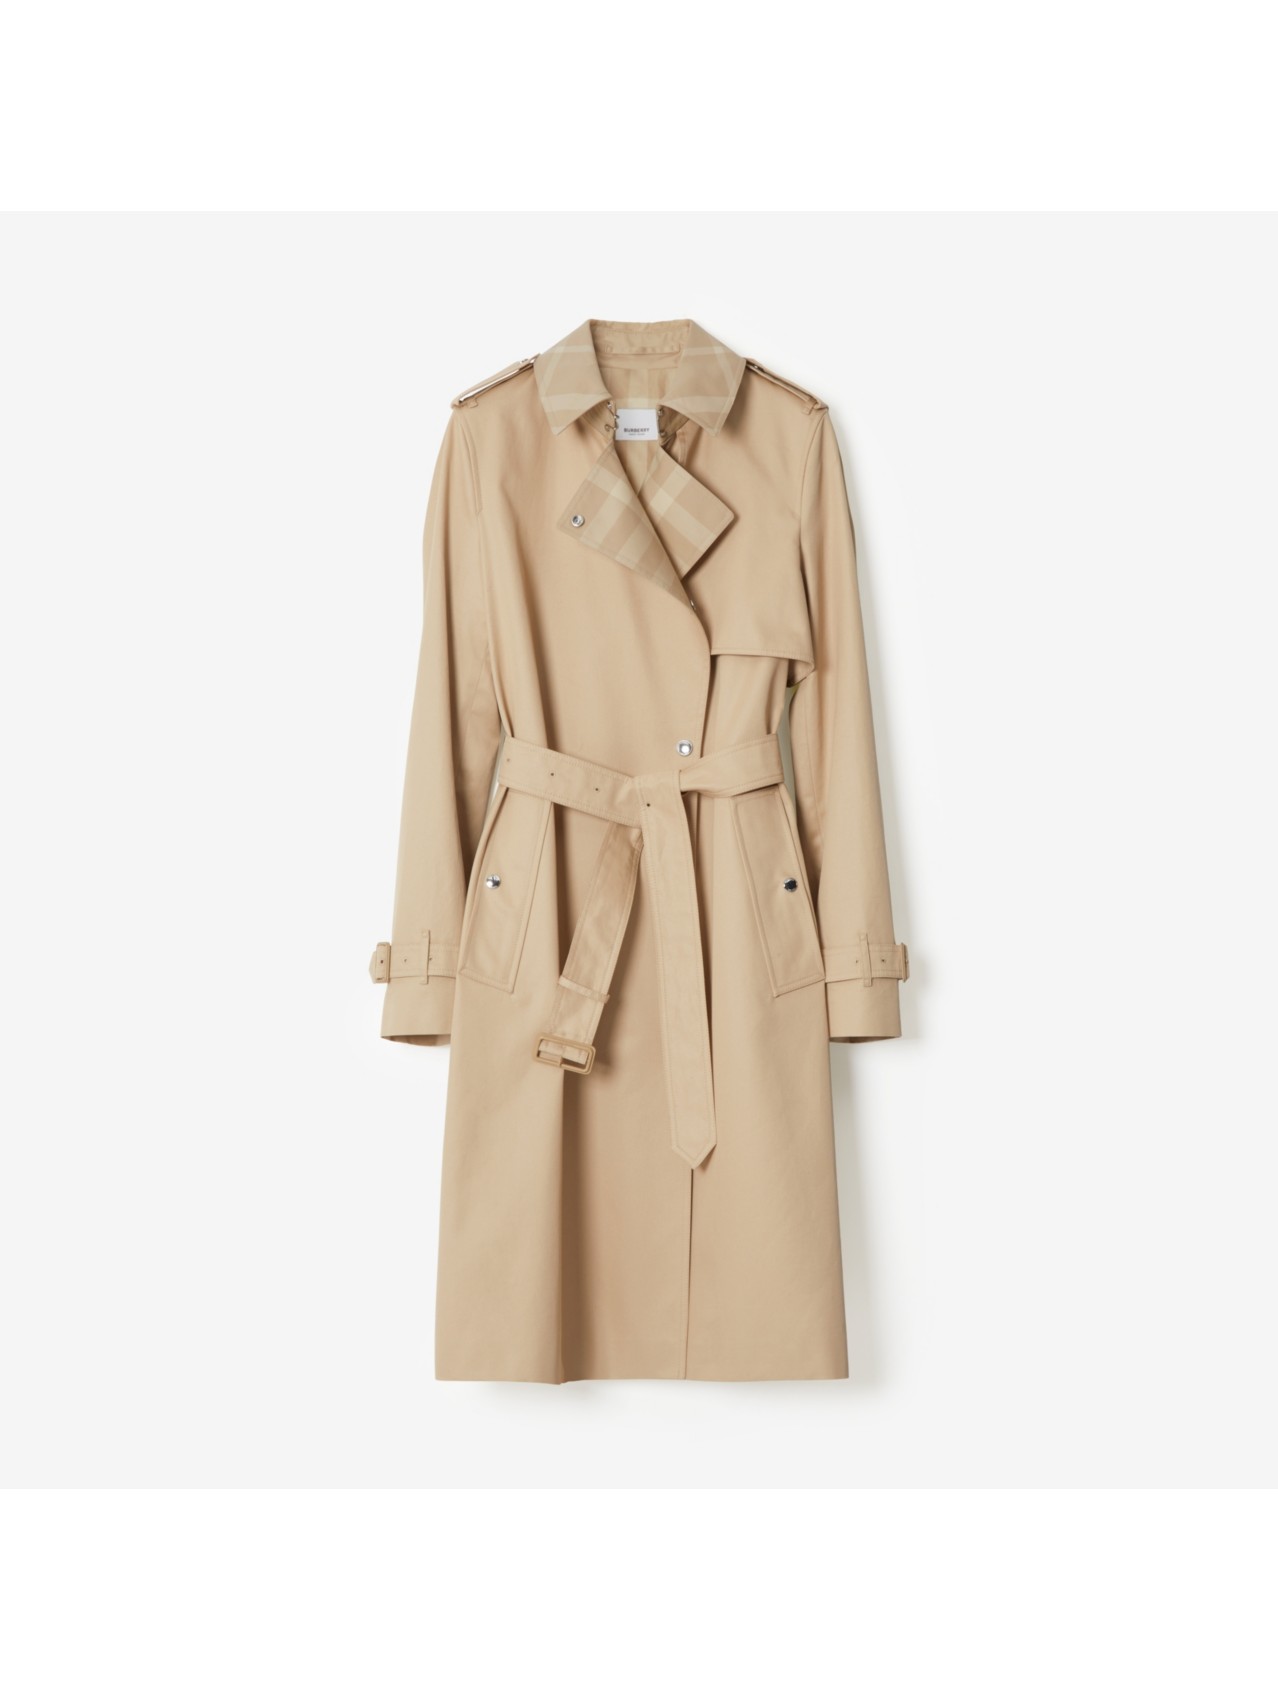 All Trench Coats